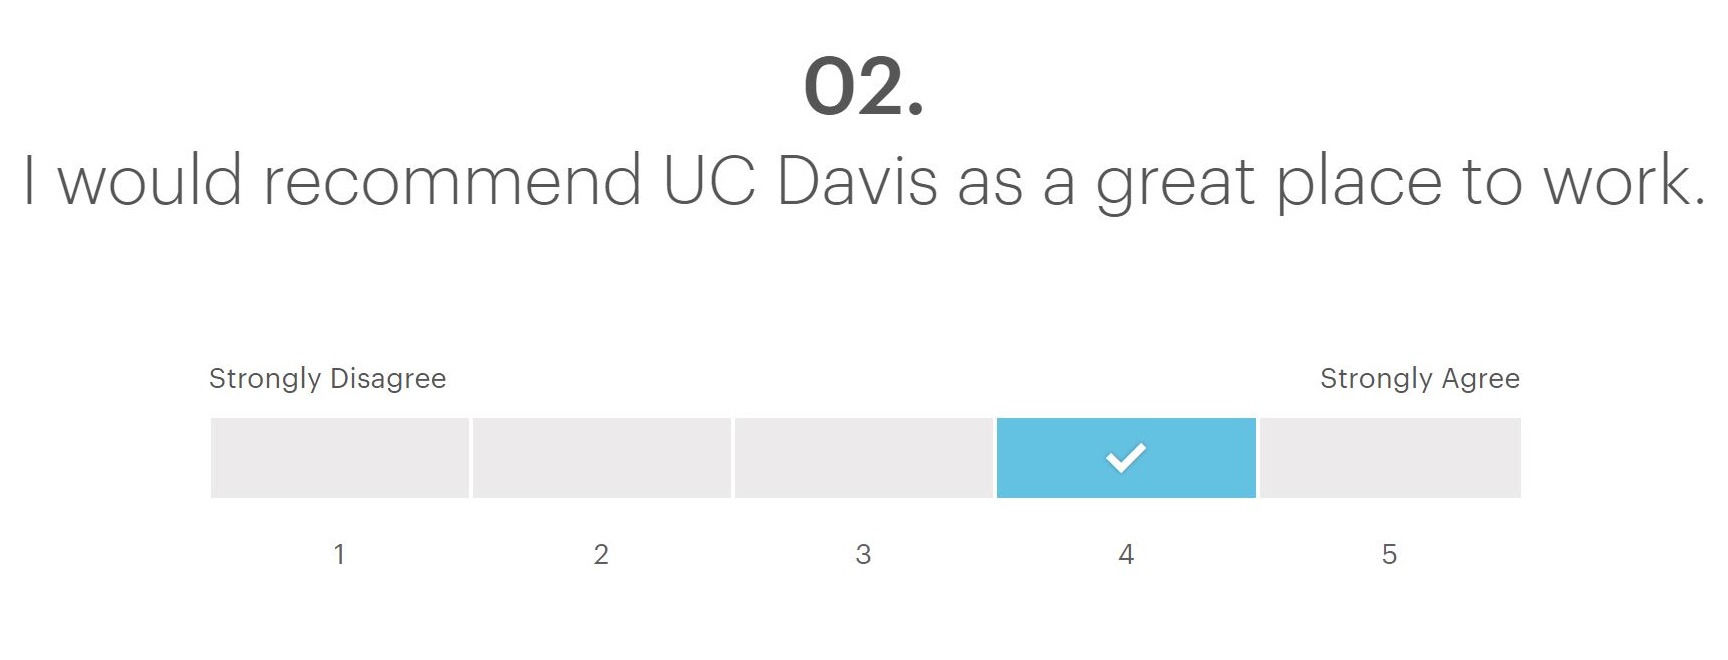 Sample question from survey asking, "I would recommend UC Davis as a great place to work."